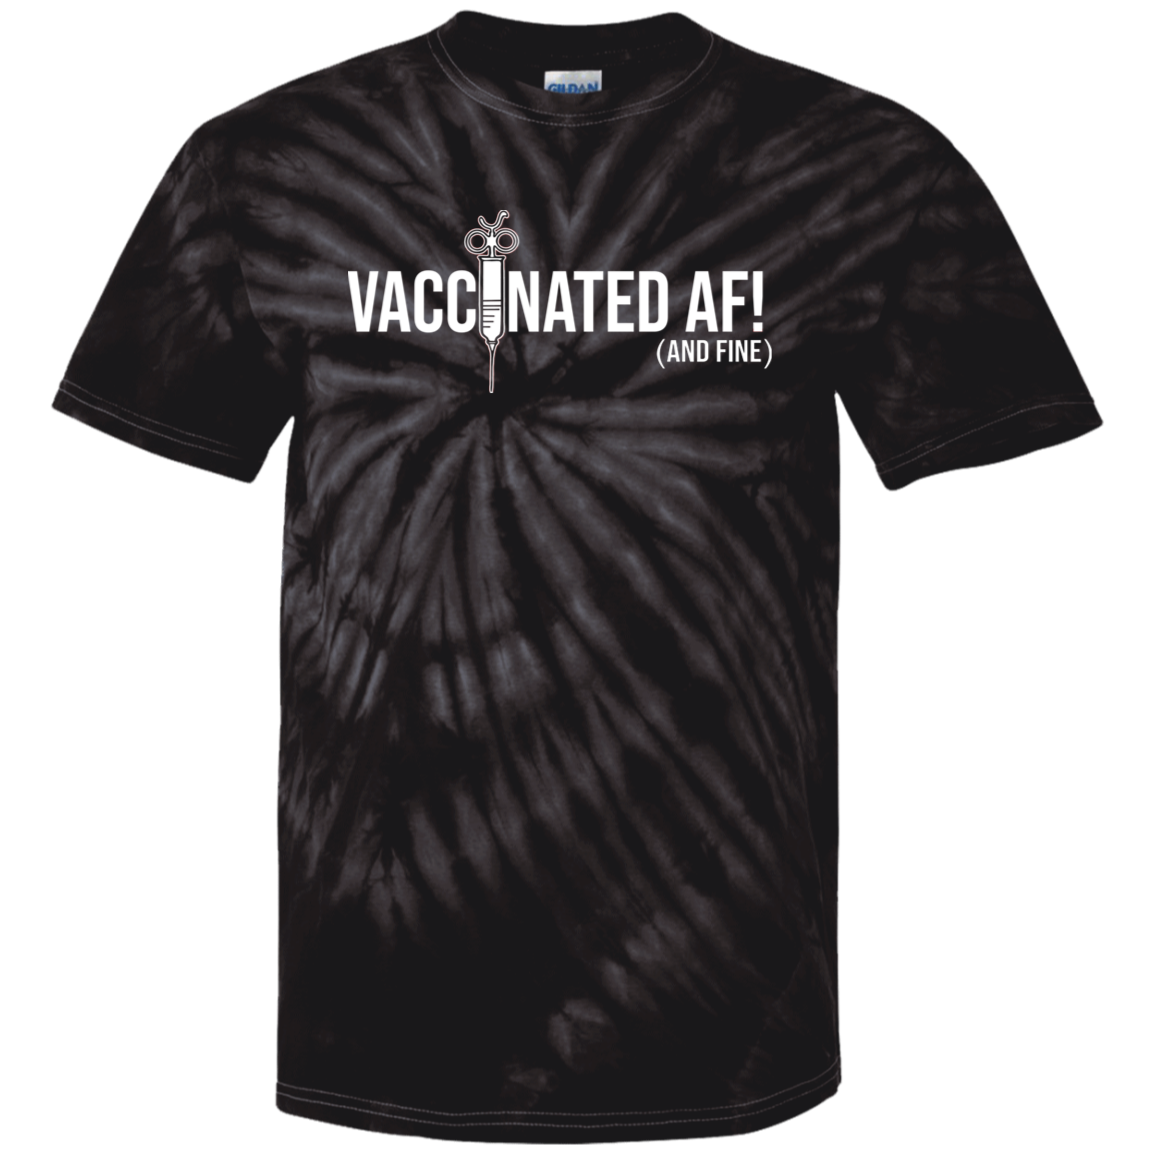 ArtichokeUSA Custom Design. Vaccinated AF (and fine). Youth Tie Dye T-Shirt